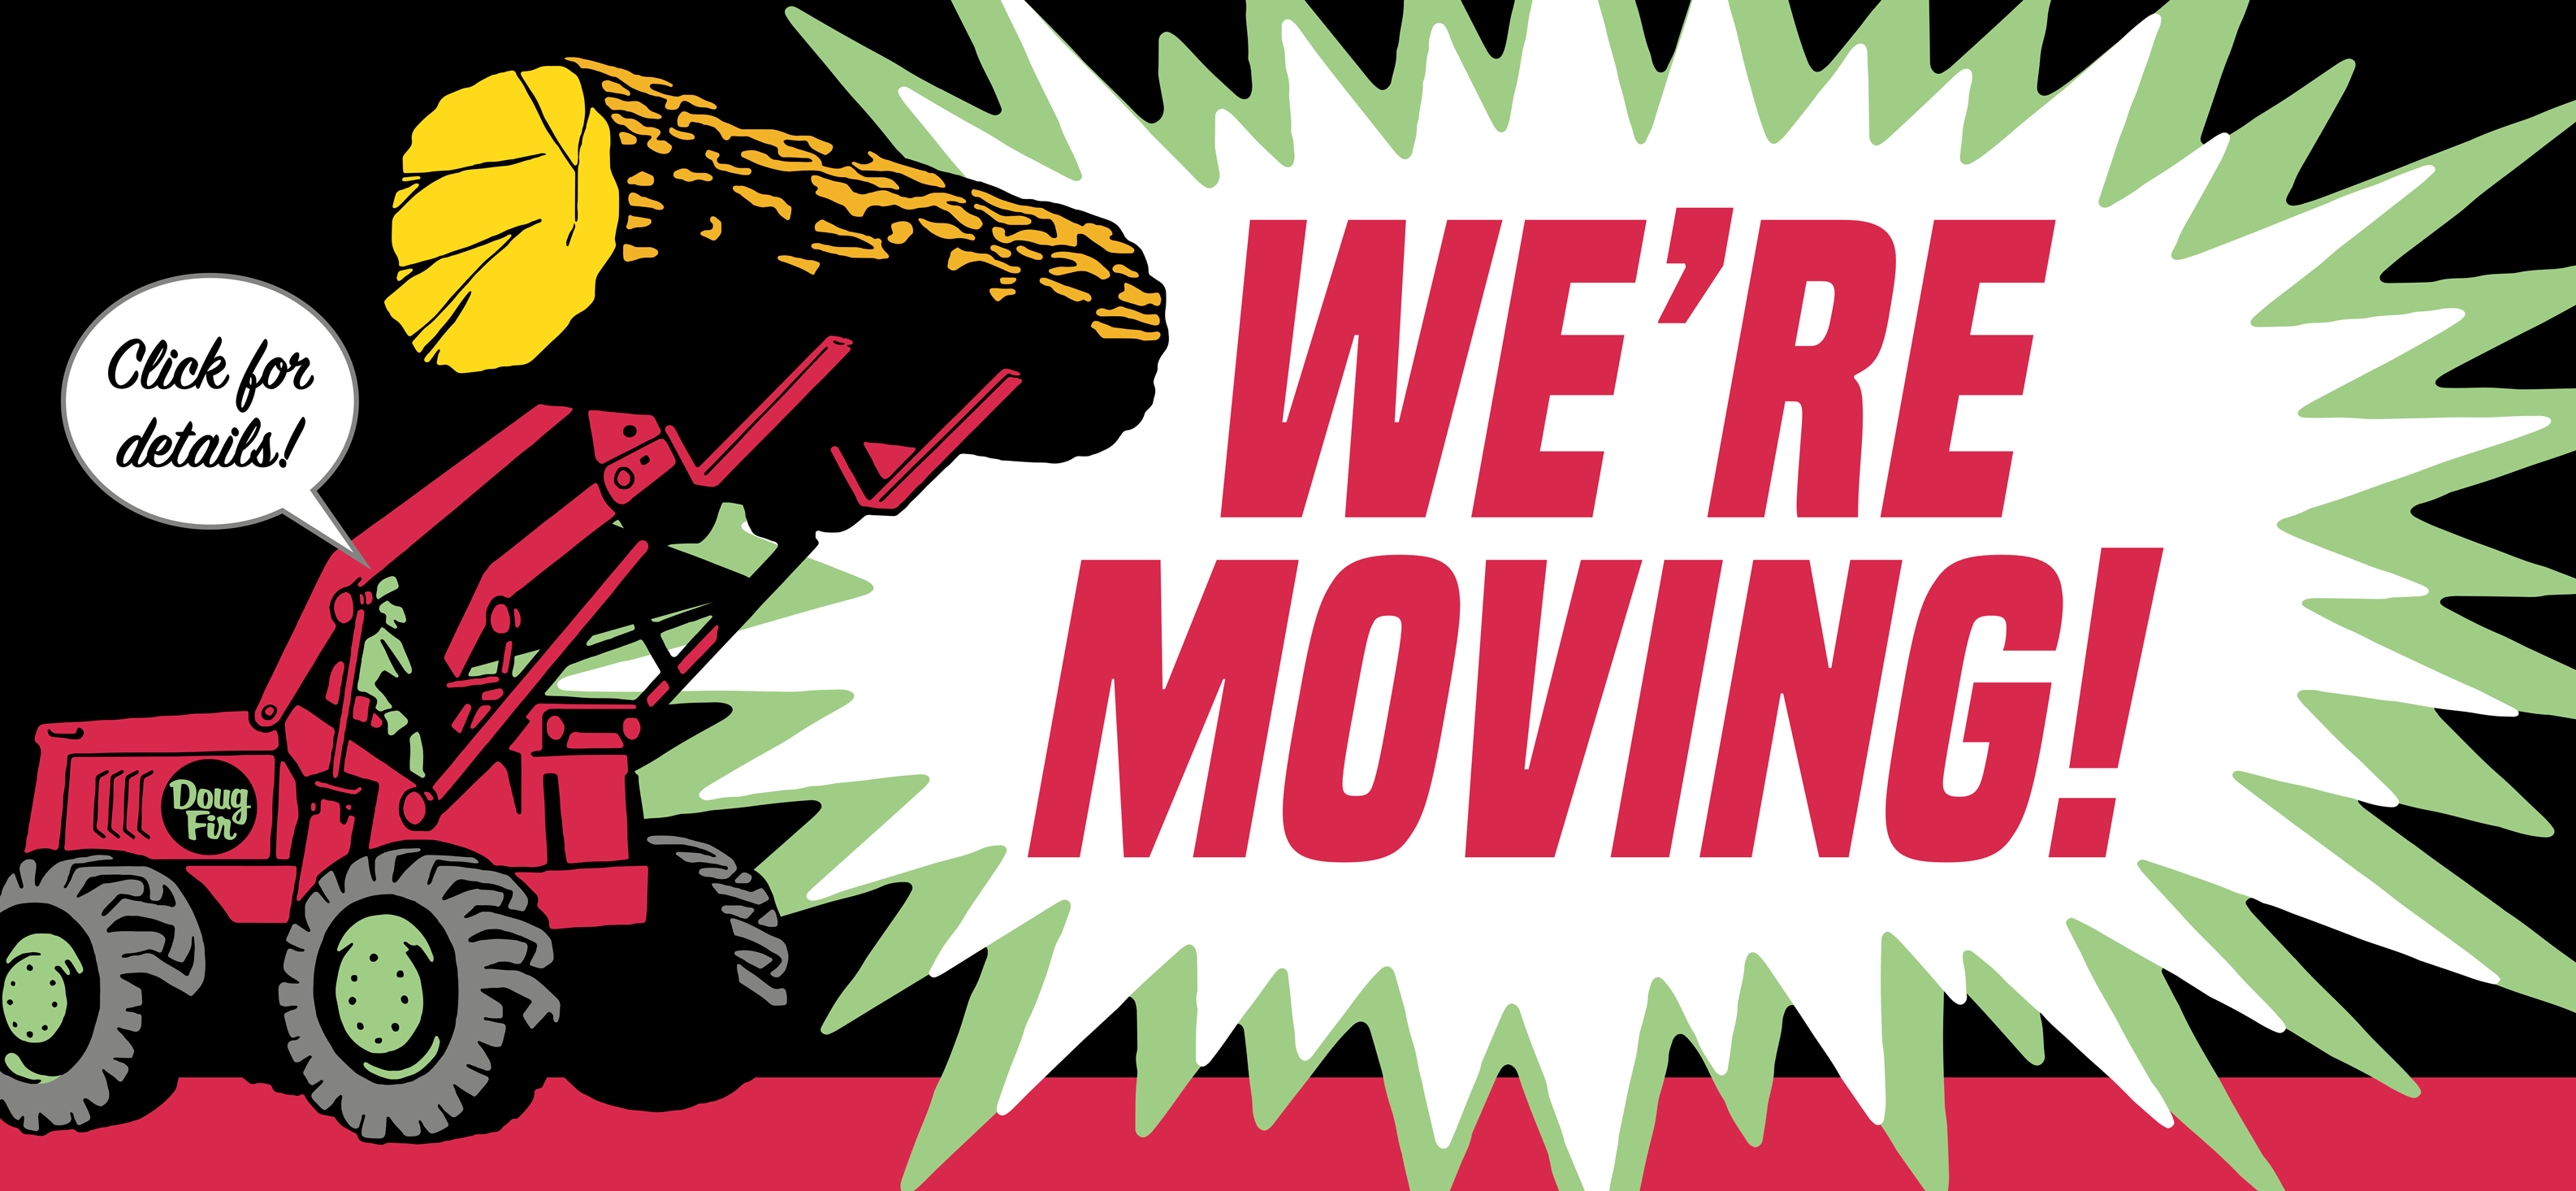 graphic stating: "We're moving, click for details!"